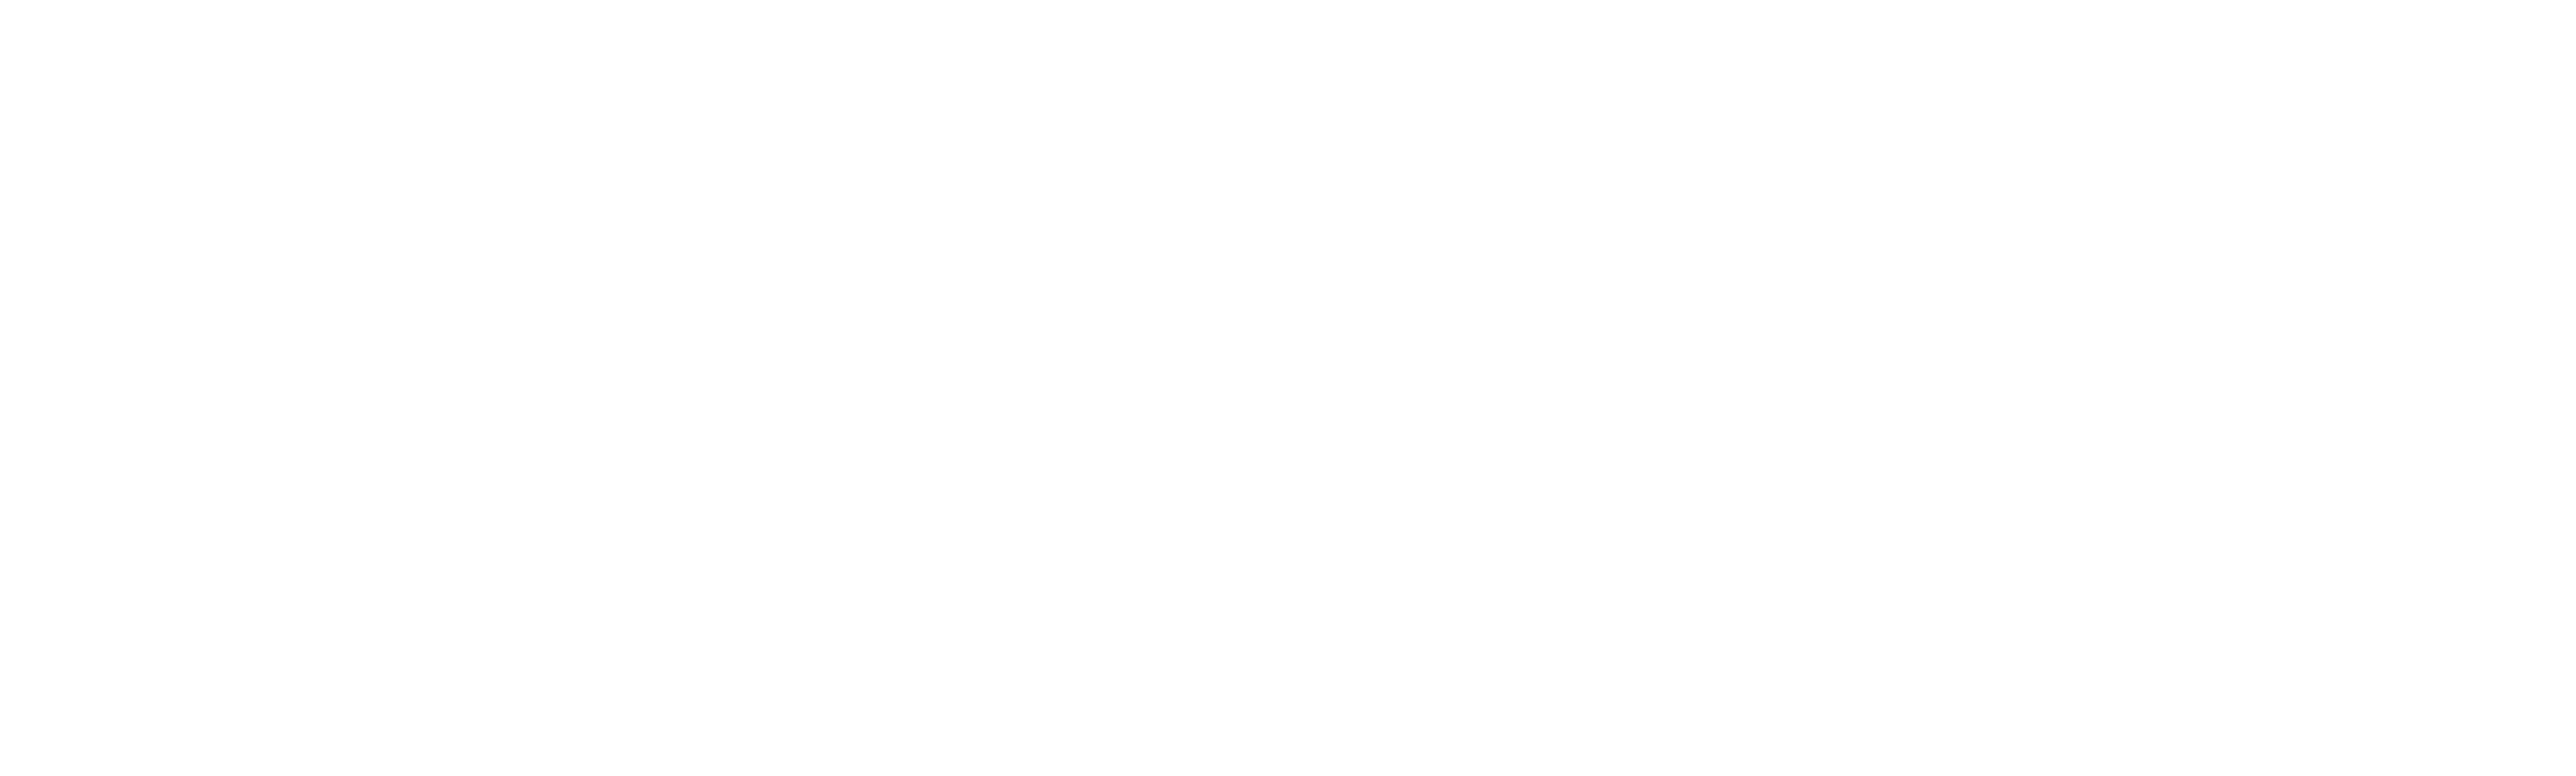 ODHS Aging Peoples with Disabilities Logo